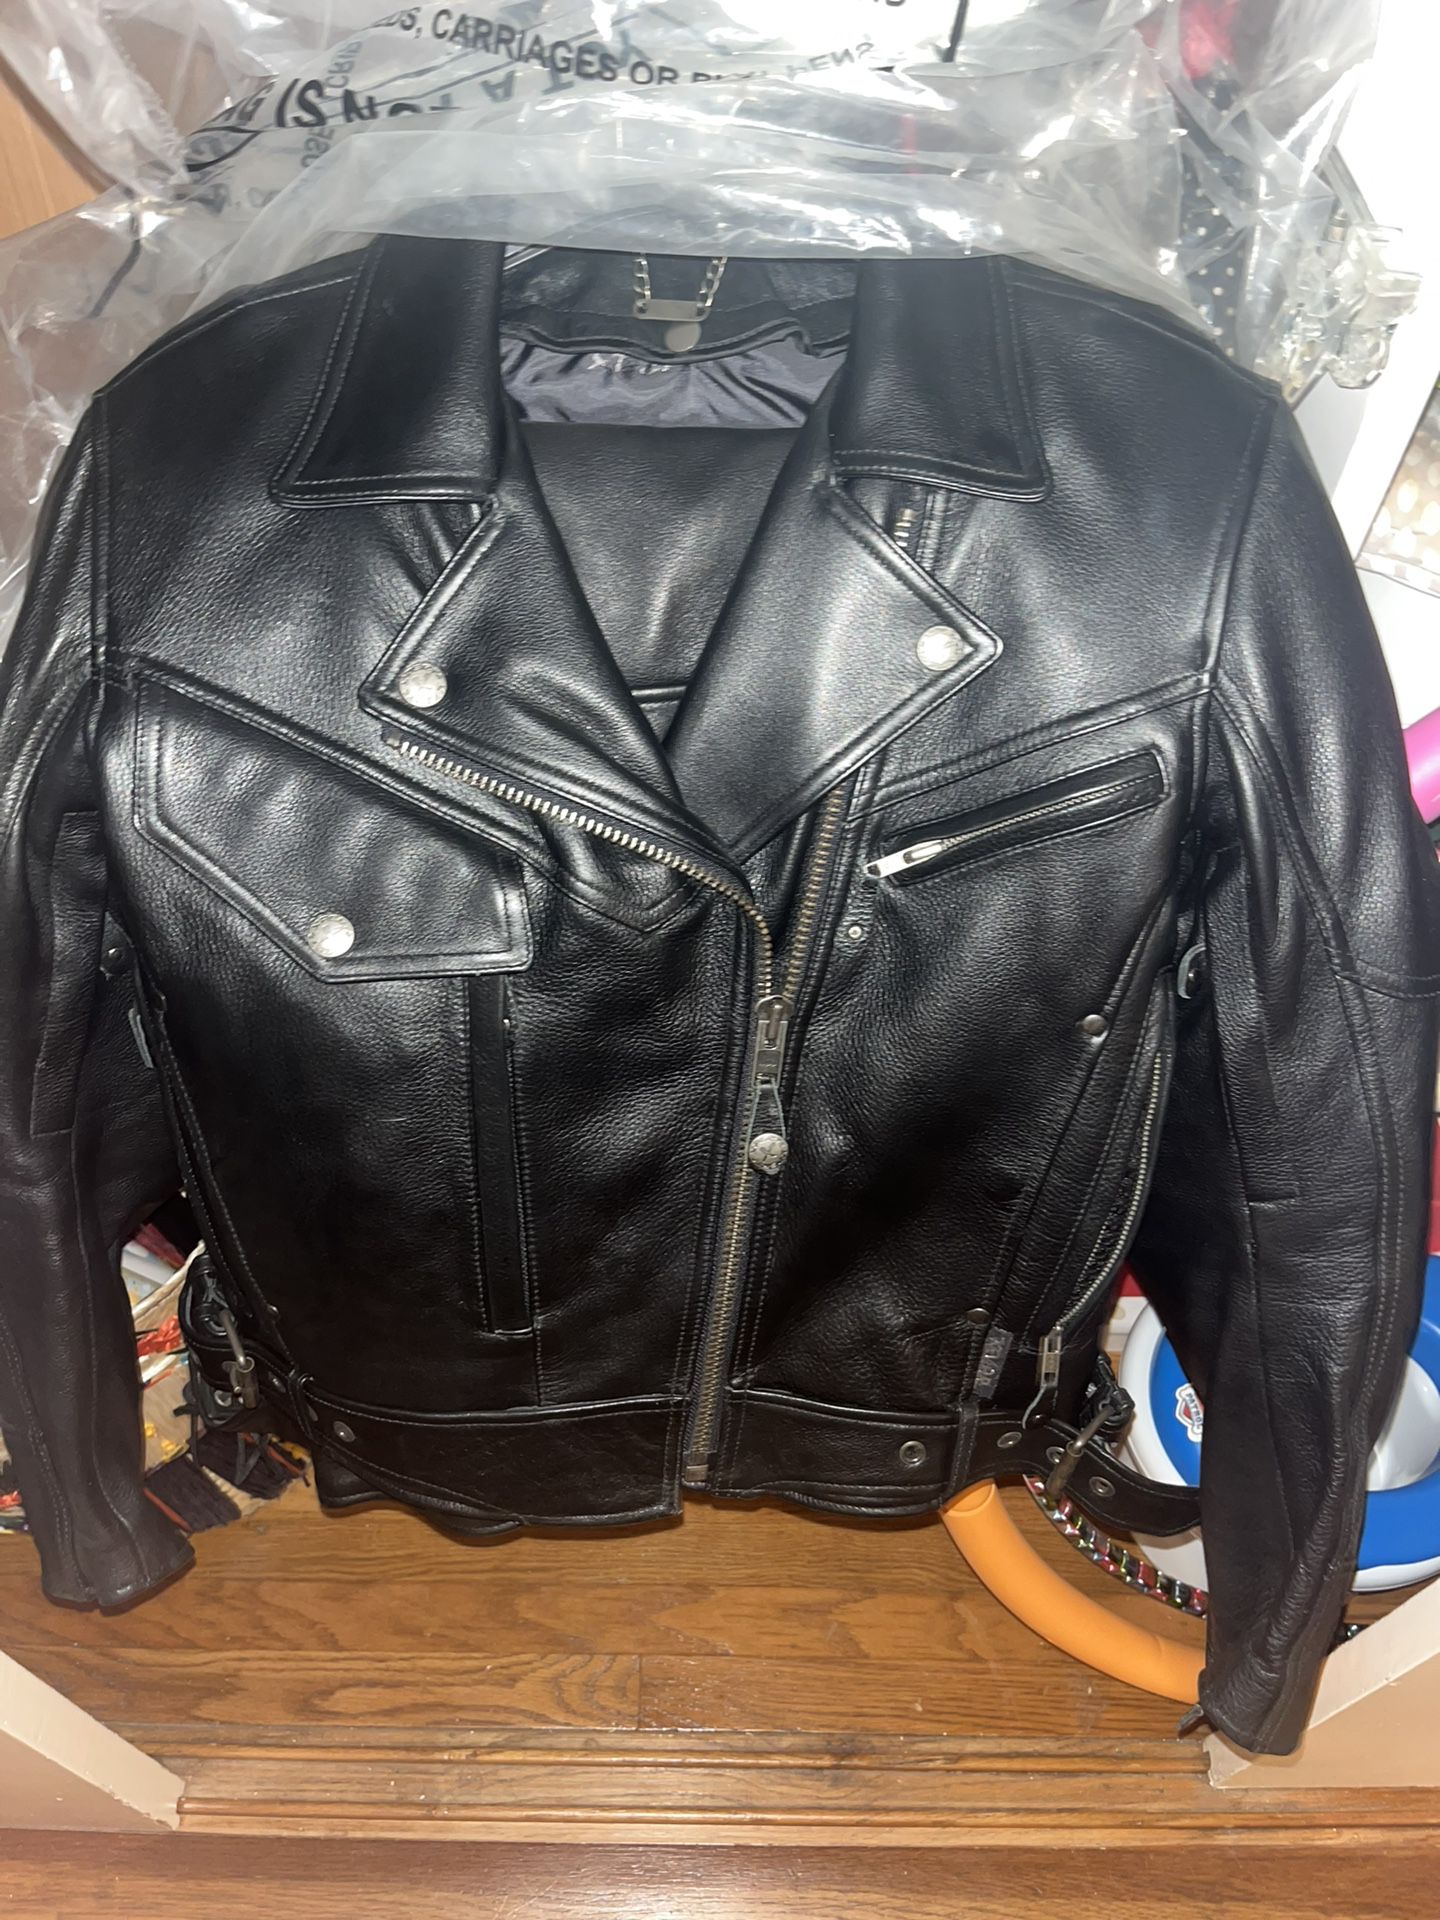 Harley Motorcycle Leathers